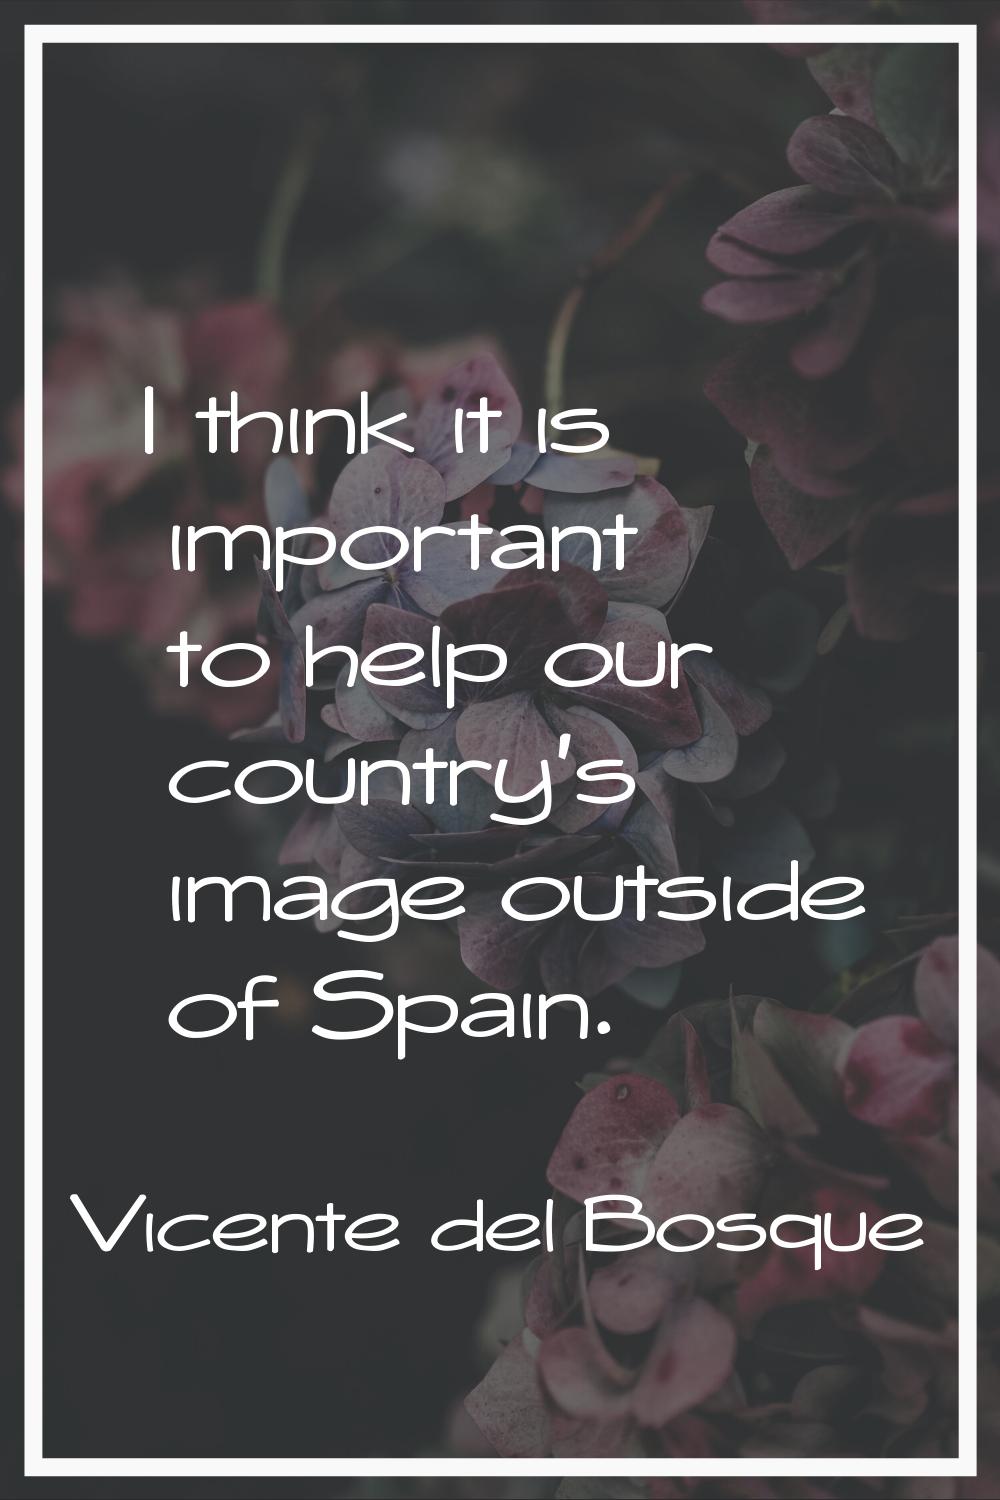 I think it is important to help our country's image outside of Spain.